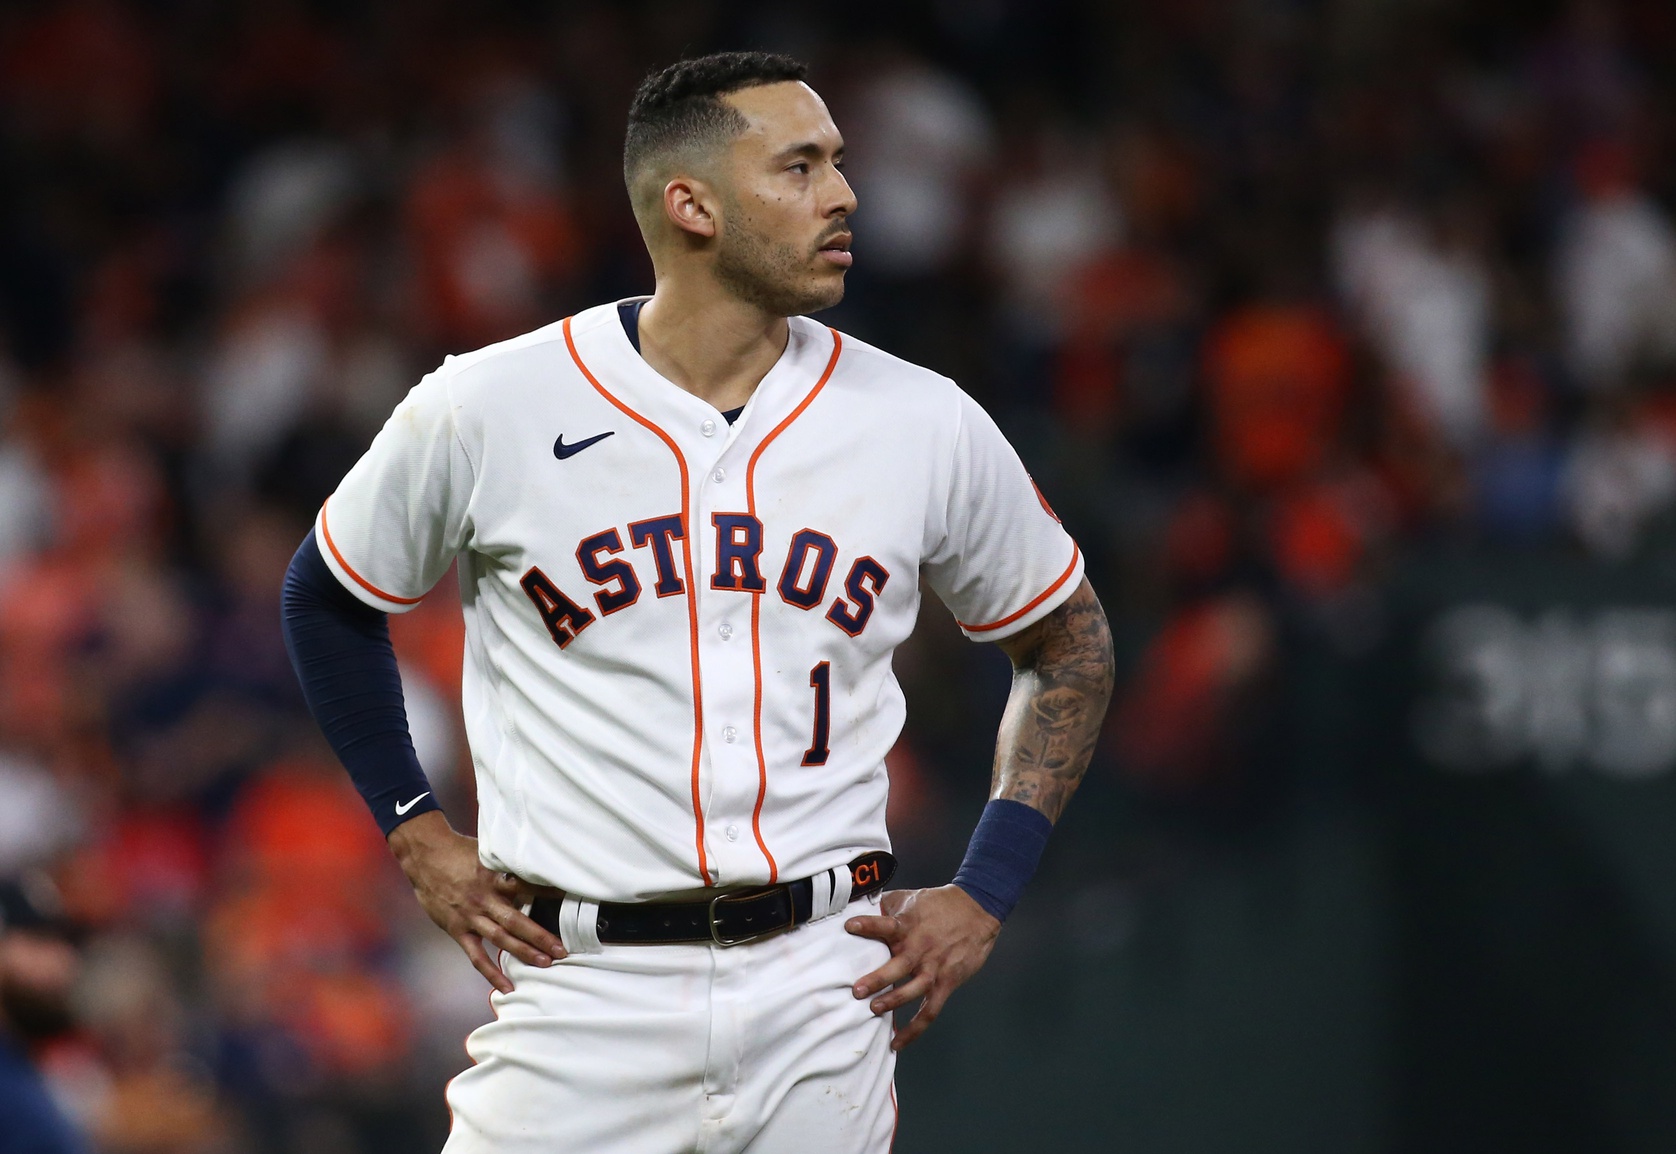 Hollywood ending! Astros beat Dodgers in Game 7 to win World Series